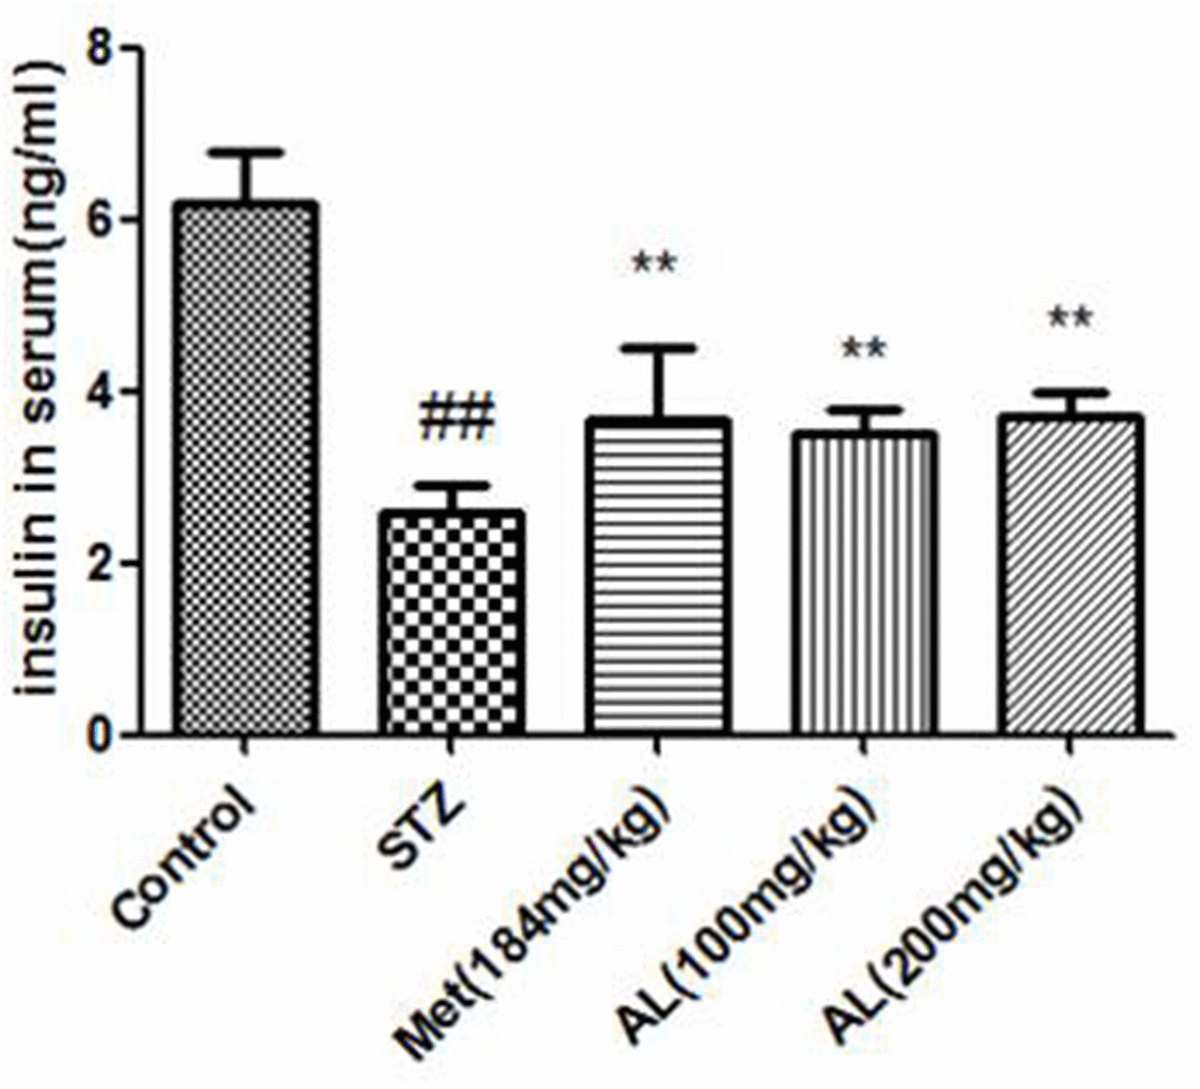 AL decreased serum insulin level in rats. Values are expressed as means±SDs. Compared with control: # P##P